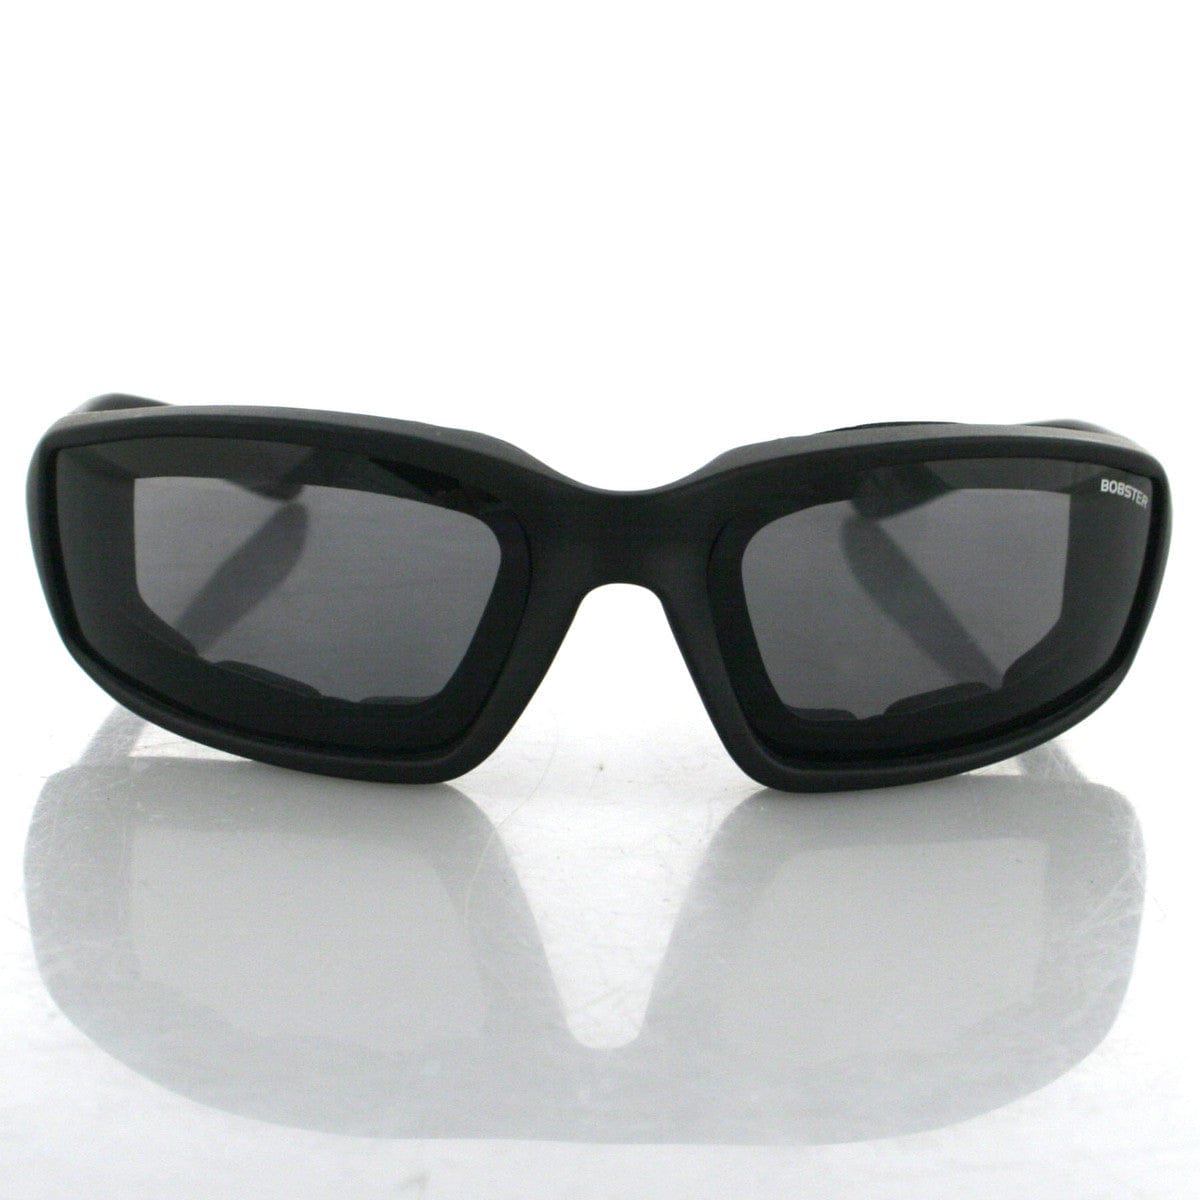 Bobster Foamerz 2 Safety Sunglasses Black Frame with Smoke Anti-Fog Lens Front View